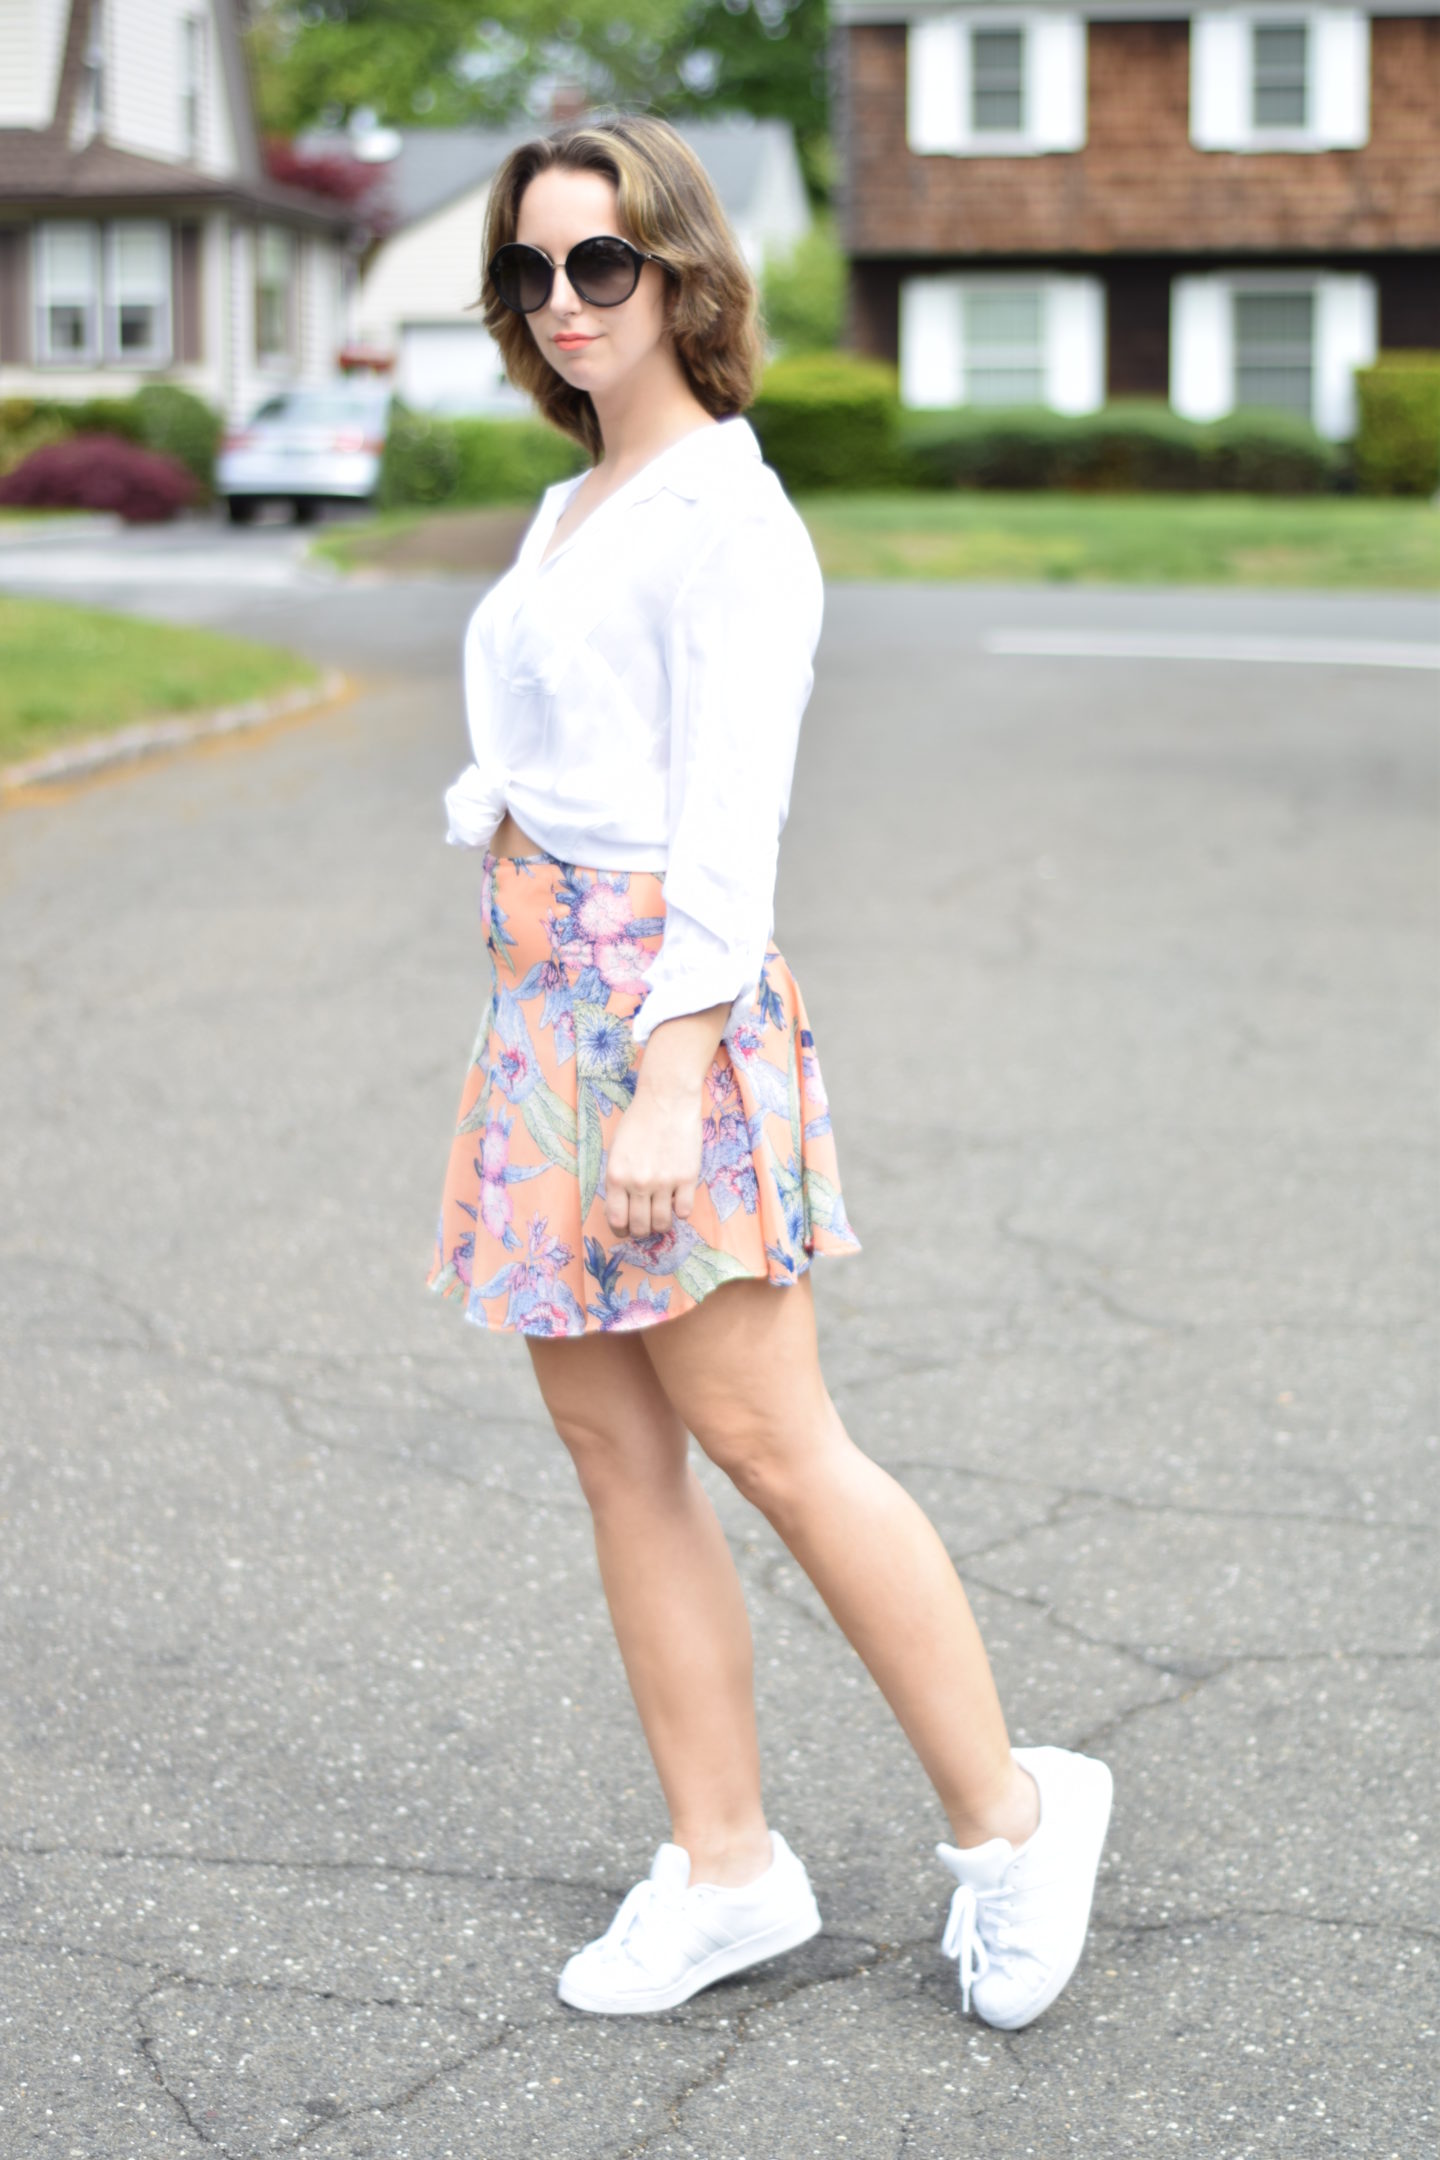 floral skirt-outfit-blogger-style-Something About Style-Mixing Feminine With Sporty Pieces 